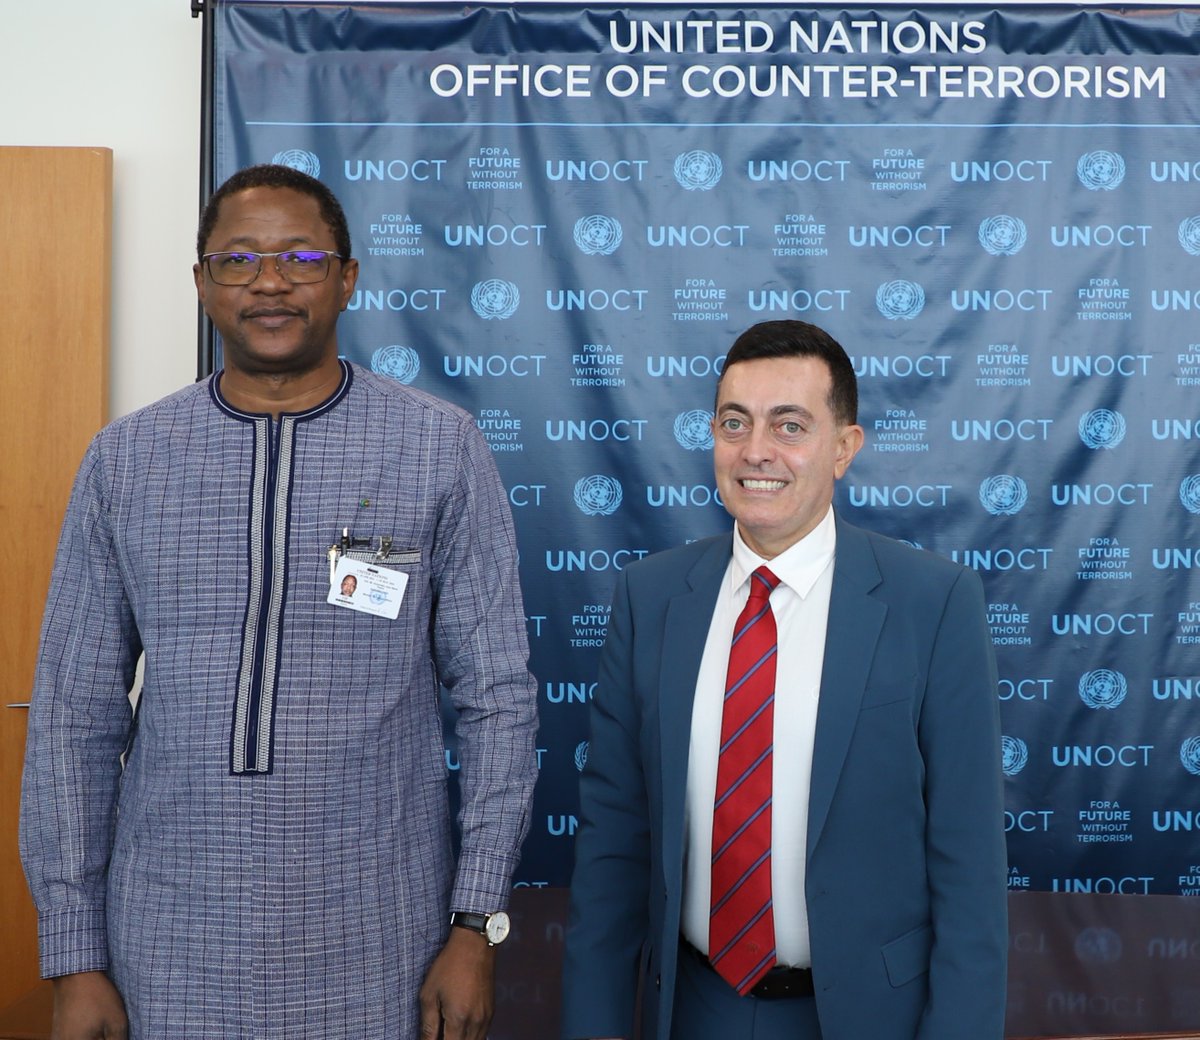 Director Mauro Miedico as OiC of @un_oct met, on behalf of USG Voronkov, with 🇧🇫#BurkinaFaso Foreign Minister Karamoko Jean-Marie Traore and ▶️exchanged views on the terrorist threat in the #Sahel ▶️discussed the importance of continued cooperation between @un_oct and 🇧🇫